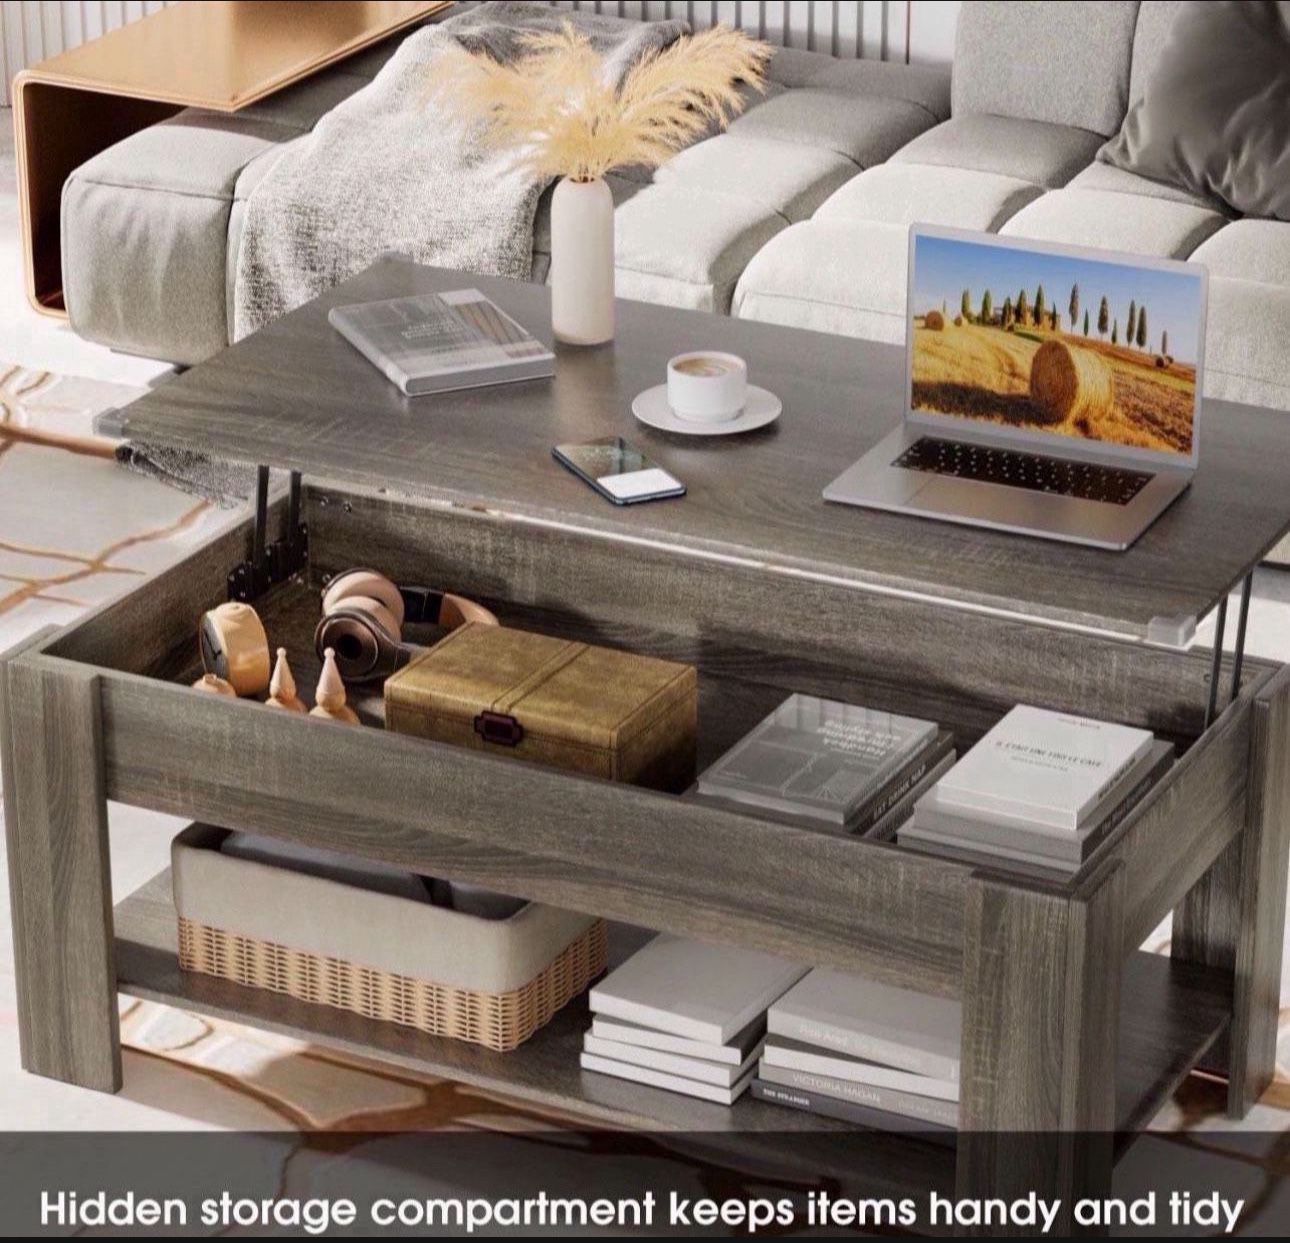 Modern Lift Top Rectangular Wood Coffee Table with Hidden Compartment & Storage, Gray48x24x19”)